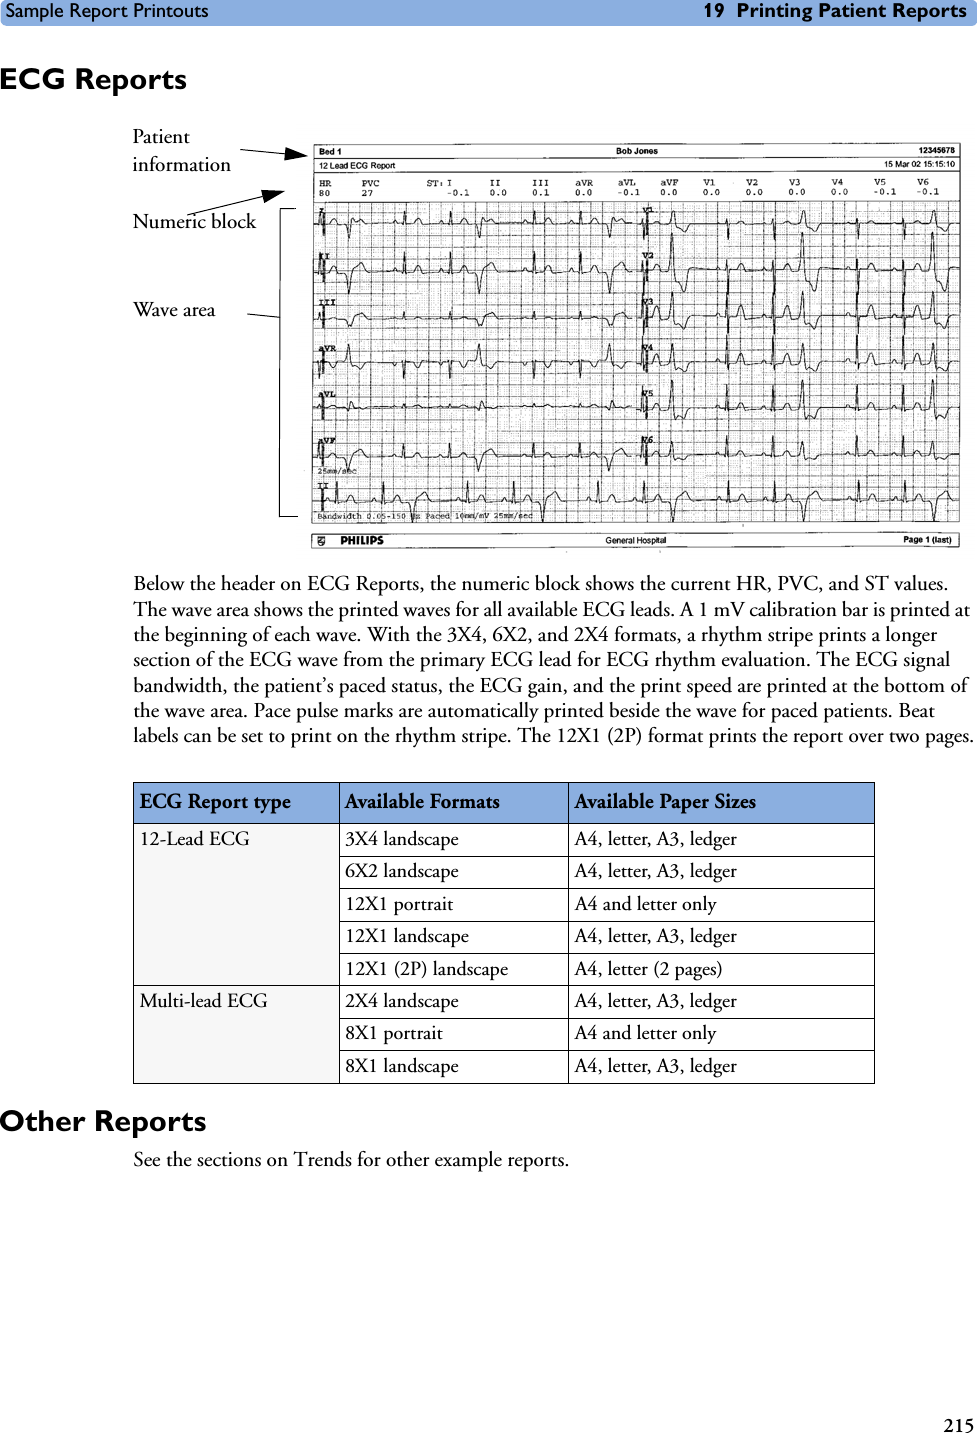 Sample Report Printouts 19 Printing Patient Reports215ECG ReportsBelow the header on ECG Reports, the numeric block shows the current HR, PVC, and ST values. The wave area shows the printed waves for all available ECG leads. A 1 mV calibration bar is printed at the beginning of each wave. With the 3X4, 6X2, and 2X4 formats, a rhythm stripe prints a longer section of the ECG wave from the primary ECG lead for ECG rhythm evaluation. The ECG signal bandwidth, the patient’s paced status, the ECG gain, and the print speed are printed at the bottom of the wave area. Pace pulse marks are automatically printed beside the wave for paced patients. Beat labels can be set to print on the rhythm stripe. The 12X1 (2P) format prints the report over two pages.Other ReportsSee the sections on Trends for other example reports.ECG Report type Available Formats Available Paper Sizes12-Lead ECG 3X4 landscape A4, letter, A3, ledger6X2 landscape A4, letter, A3, ledger12X1 portrait A4 and letter only12X1 landscape A4, letter, A3, ledger12X1 (2P) landscape A4, letter (2 pages)Multi-lead ECG 2X4 landscape A4, letter, A3, ledger8X1 portrait A4 and letter only8X1 landscape A4, letter, A3, ledgerPatient informationNumeric blockWave area